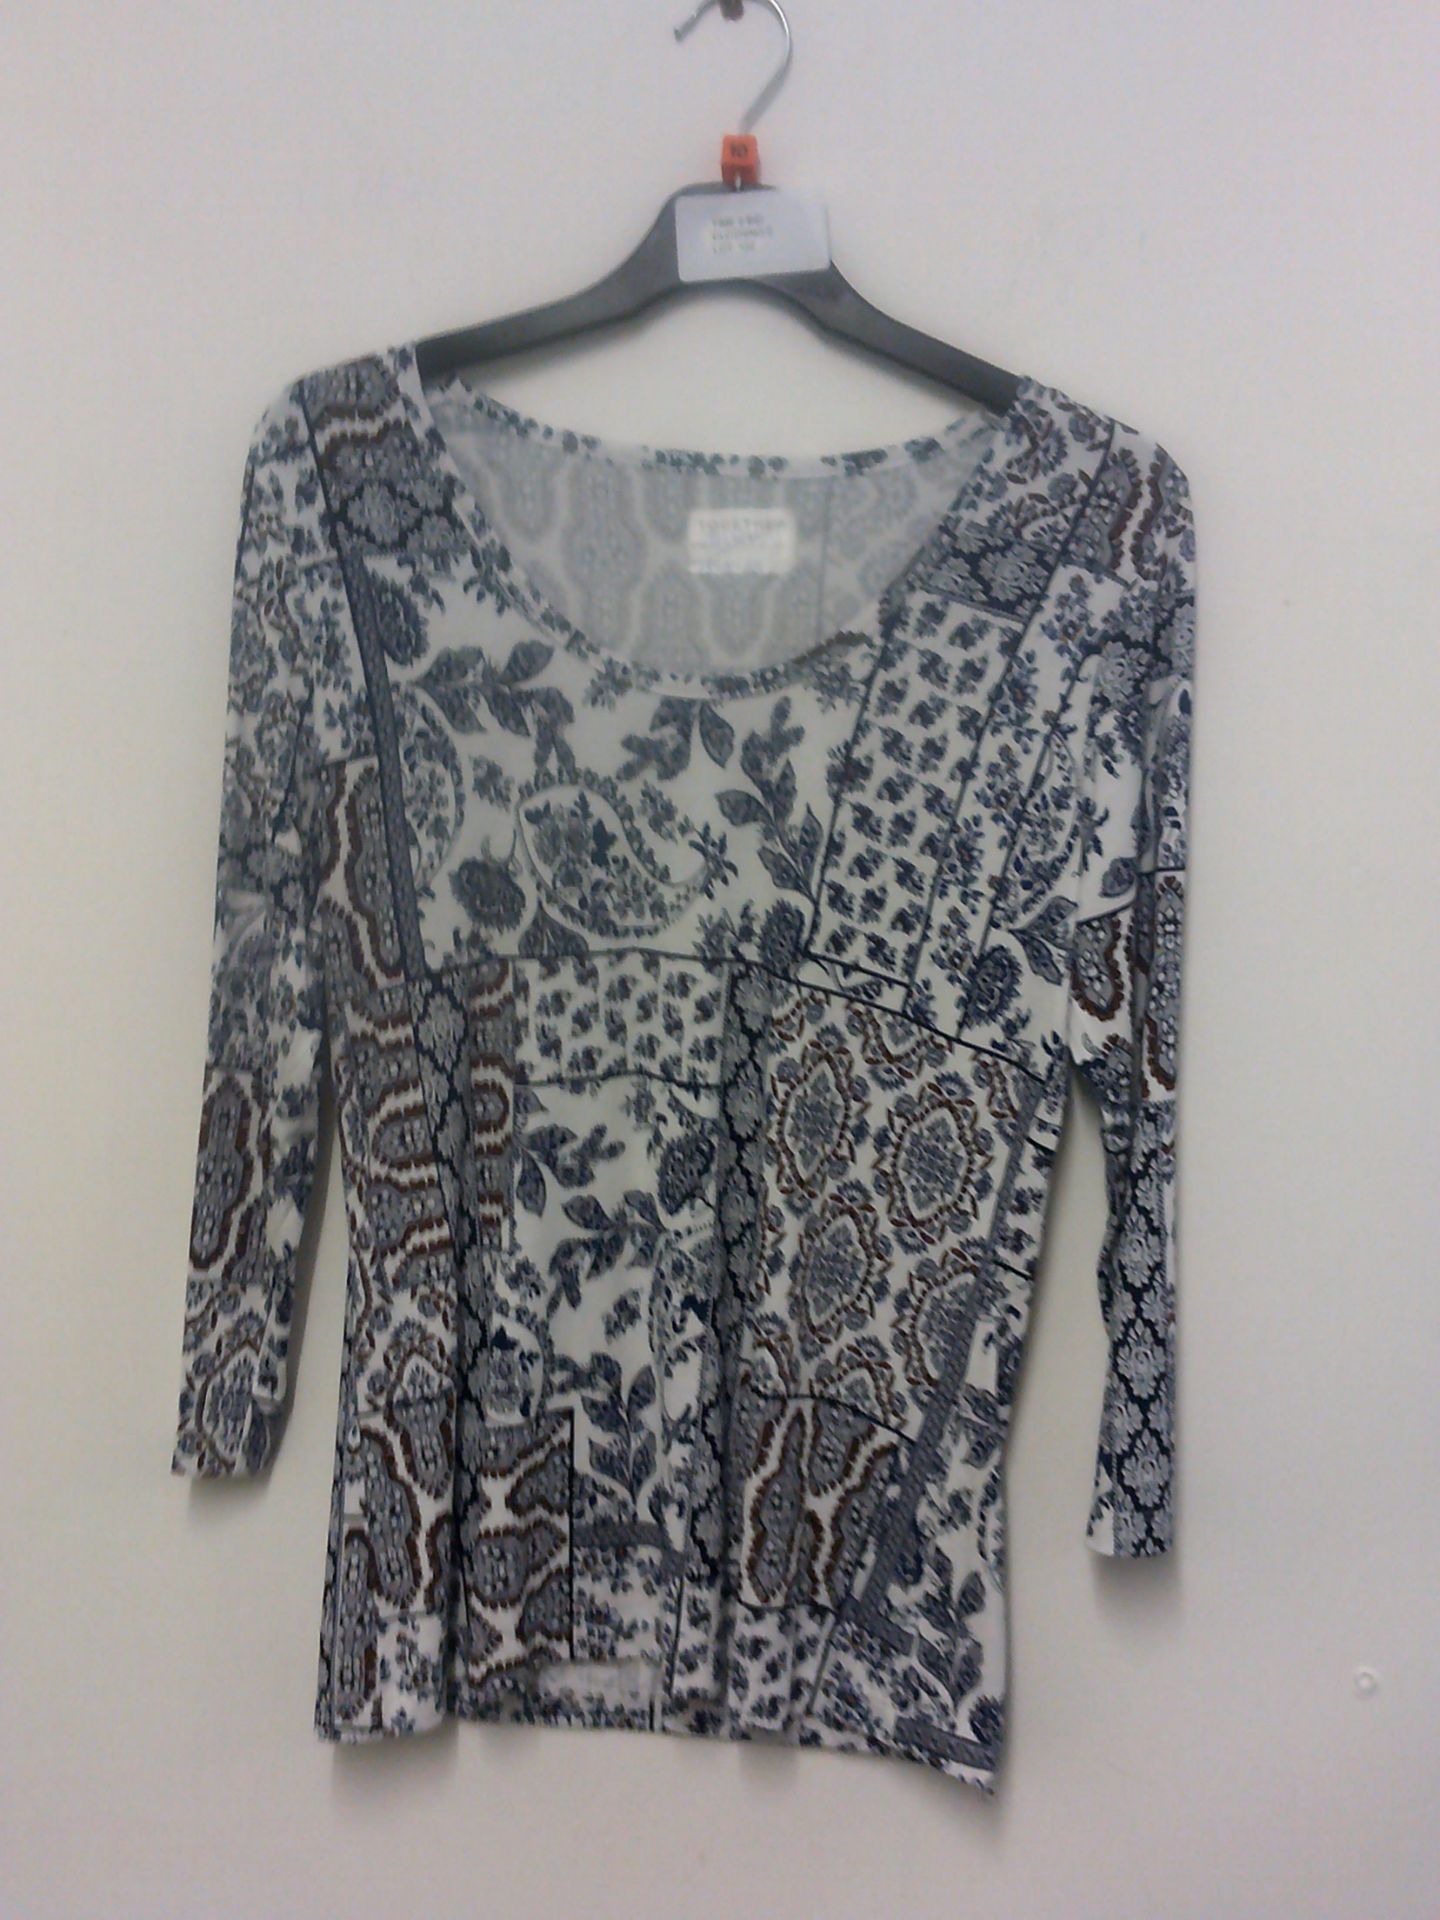 TOGETHER PAISLEY TOP SIZE 10